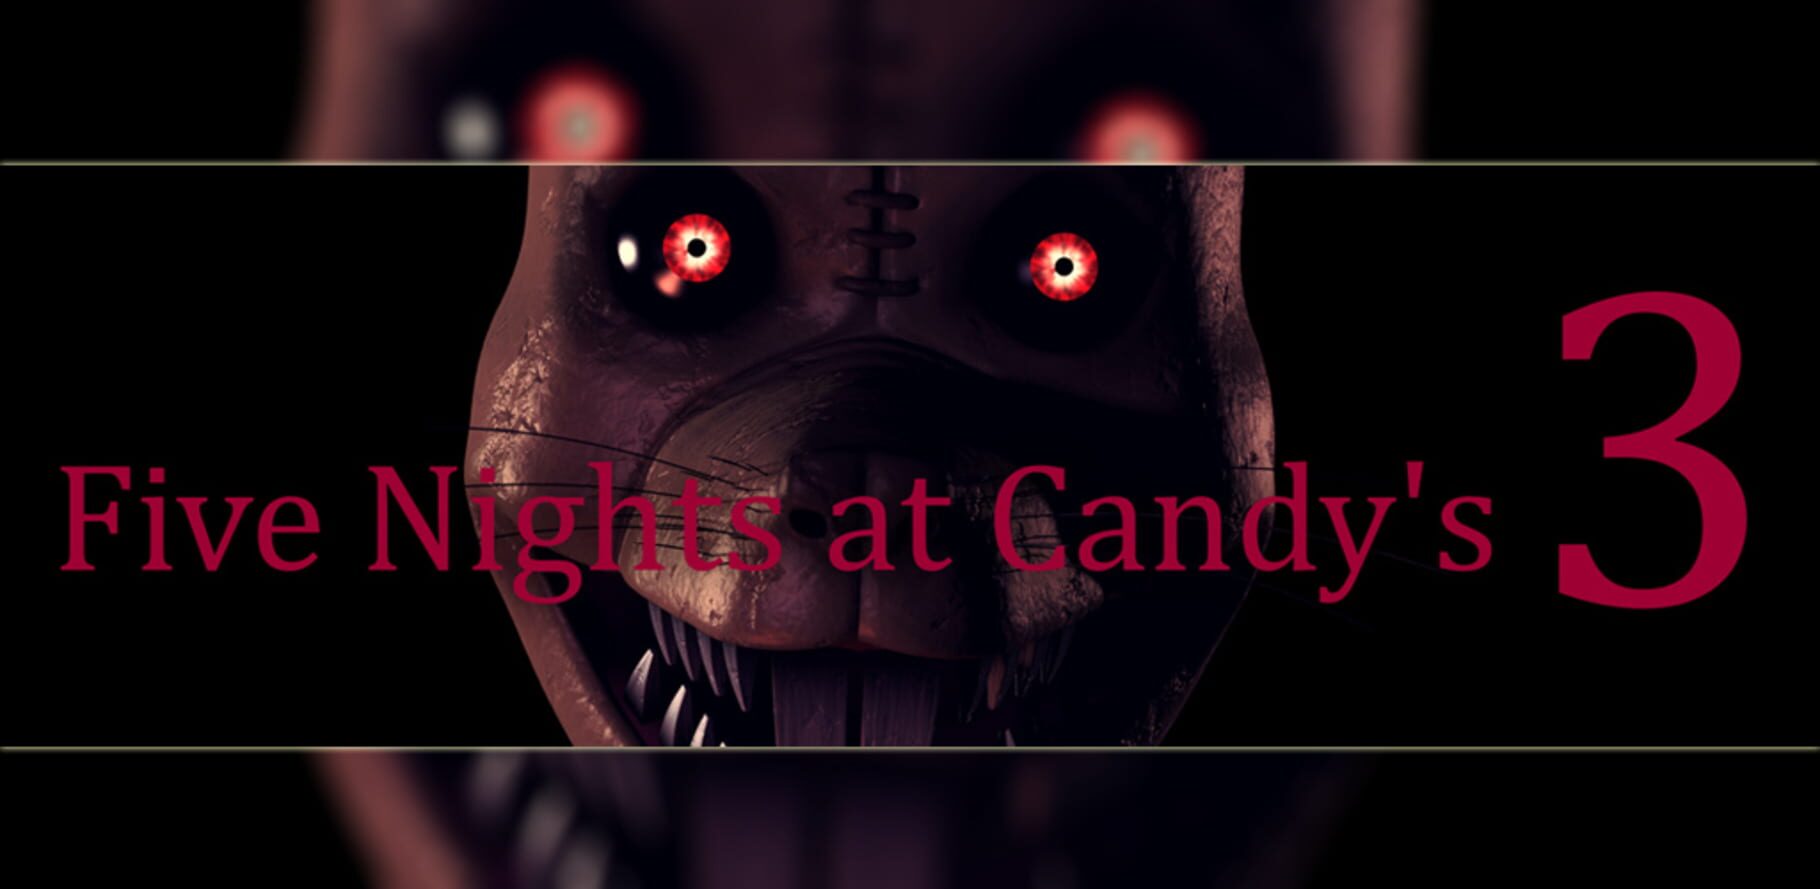 Five Nights at Candy's 3 artwork